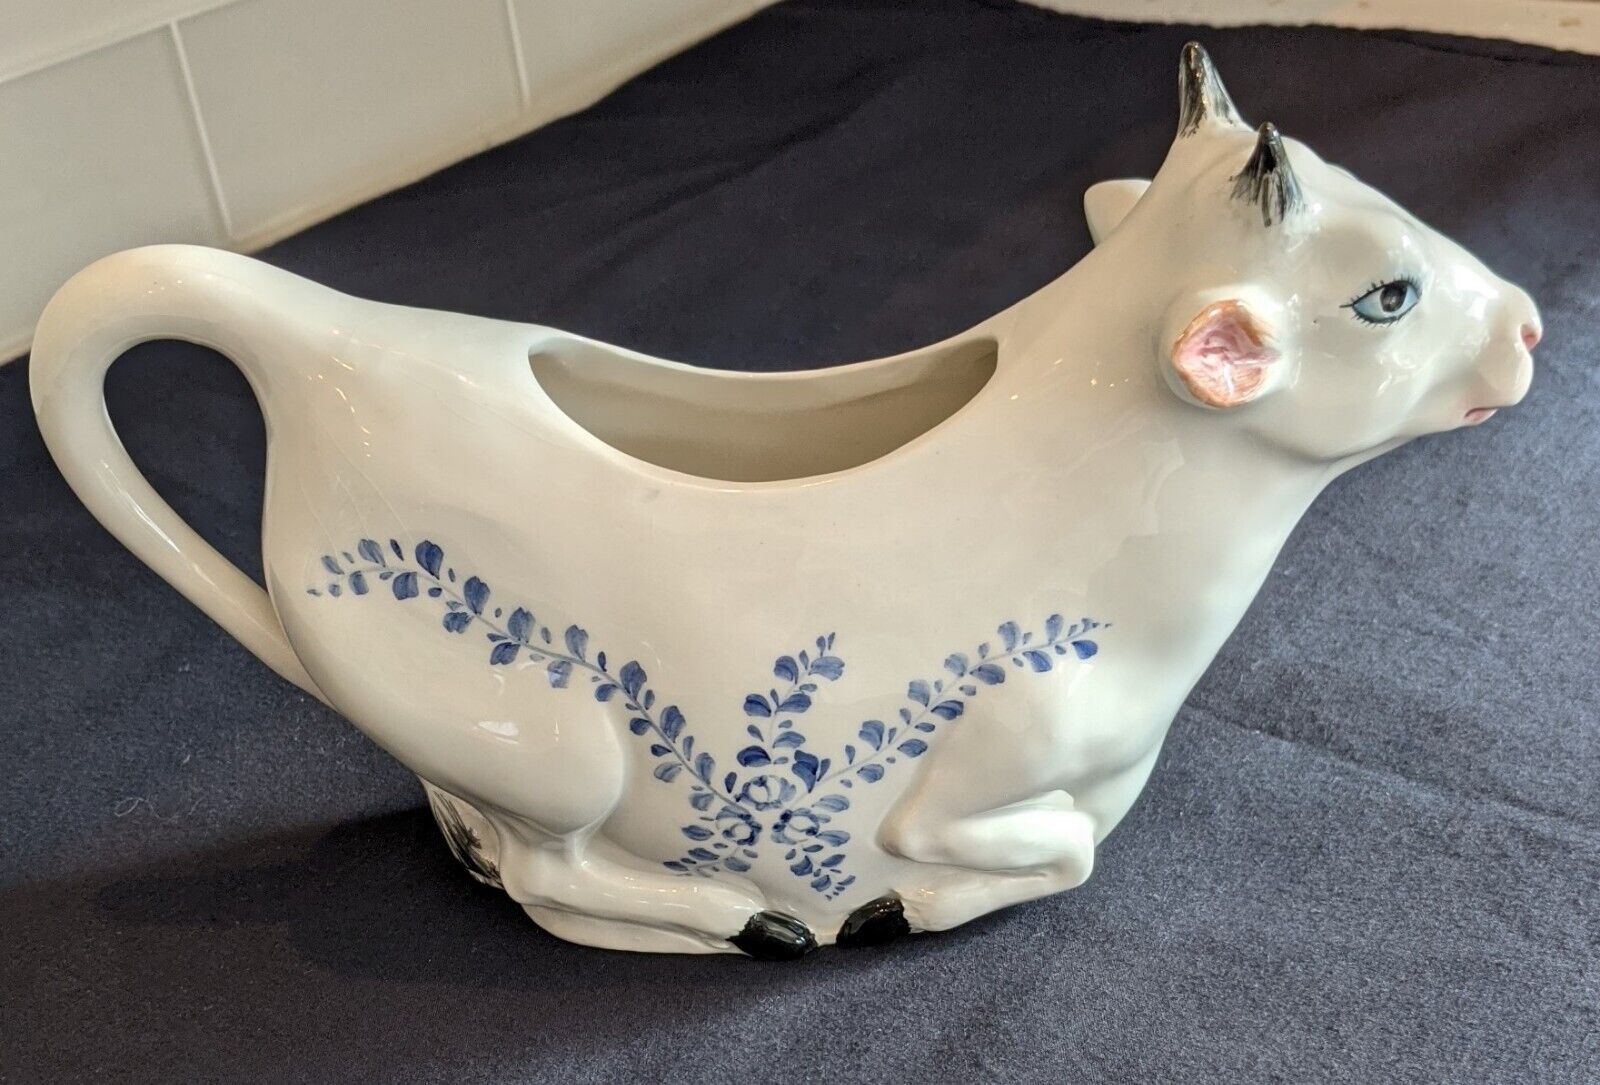 Vintage hand-painted pitcher shaped like a cow (Revlon cosmetics connection)